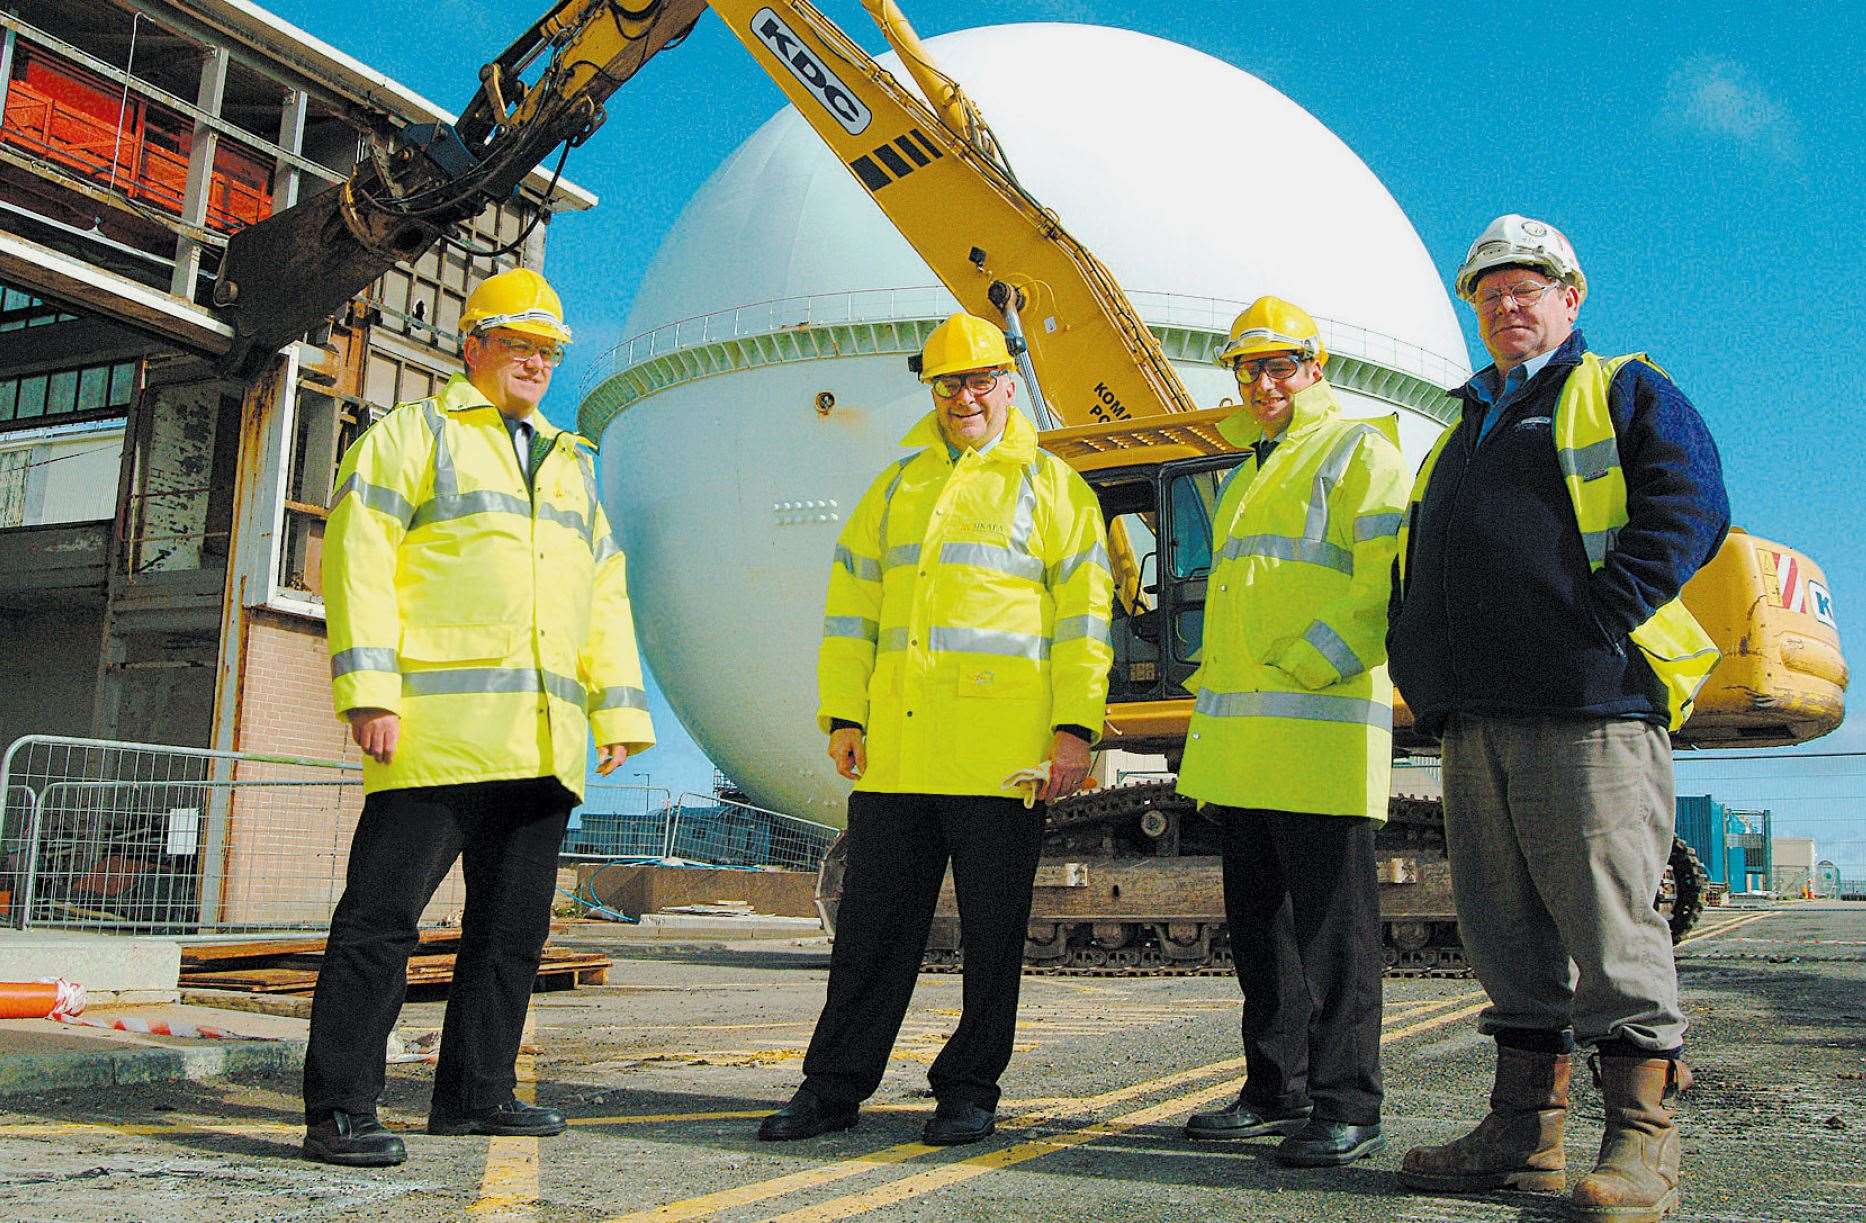 Mike Brown, Norman Harrison, John Smith and Colin Martin in 2005 with demolition under way on a large building adjacent to the Dounreay Fast Reactor.